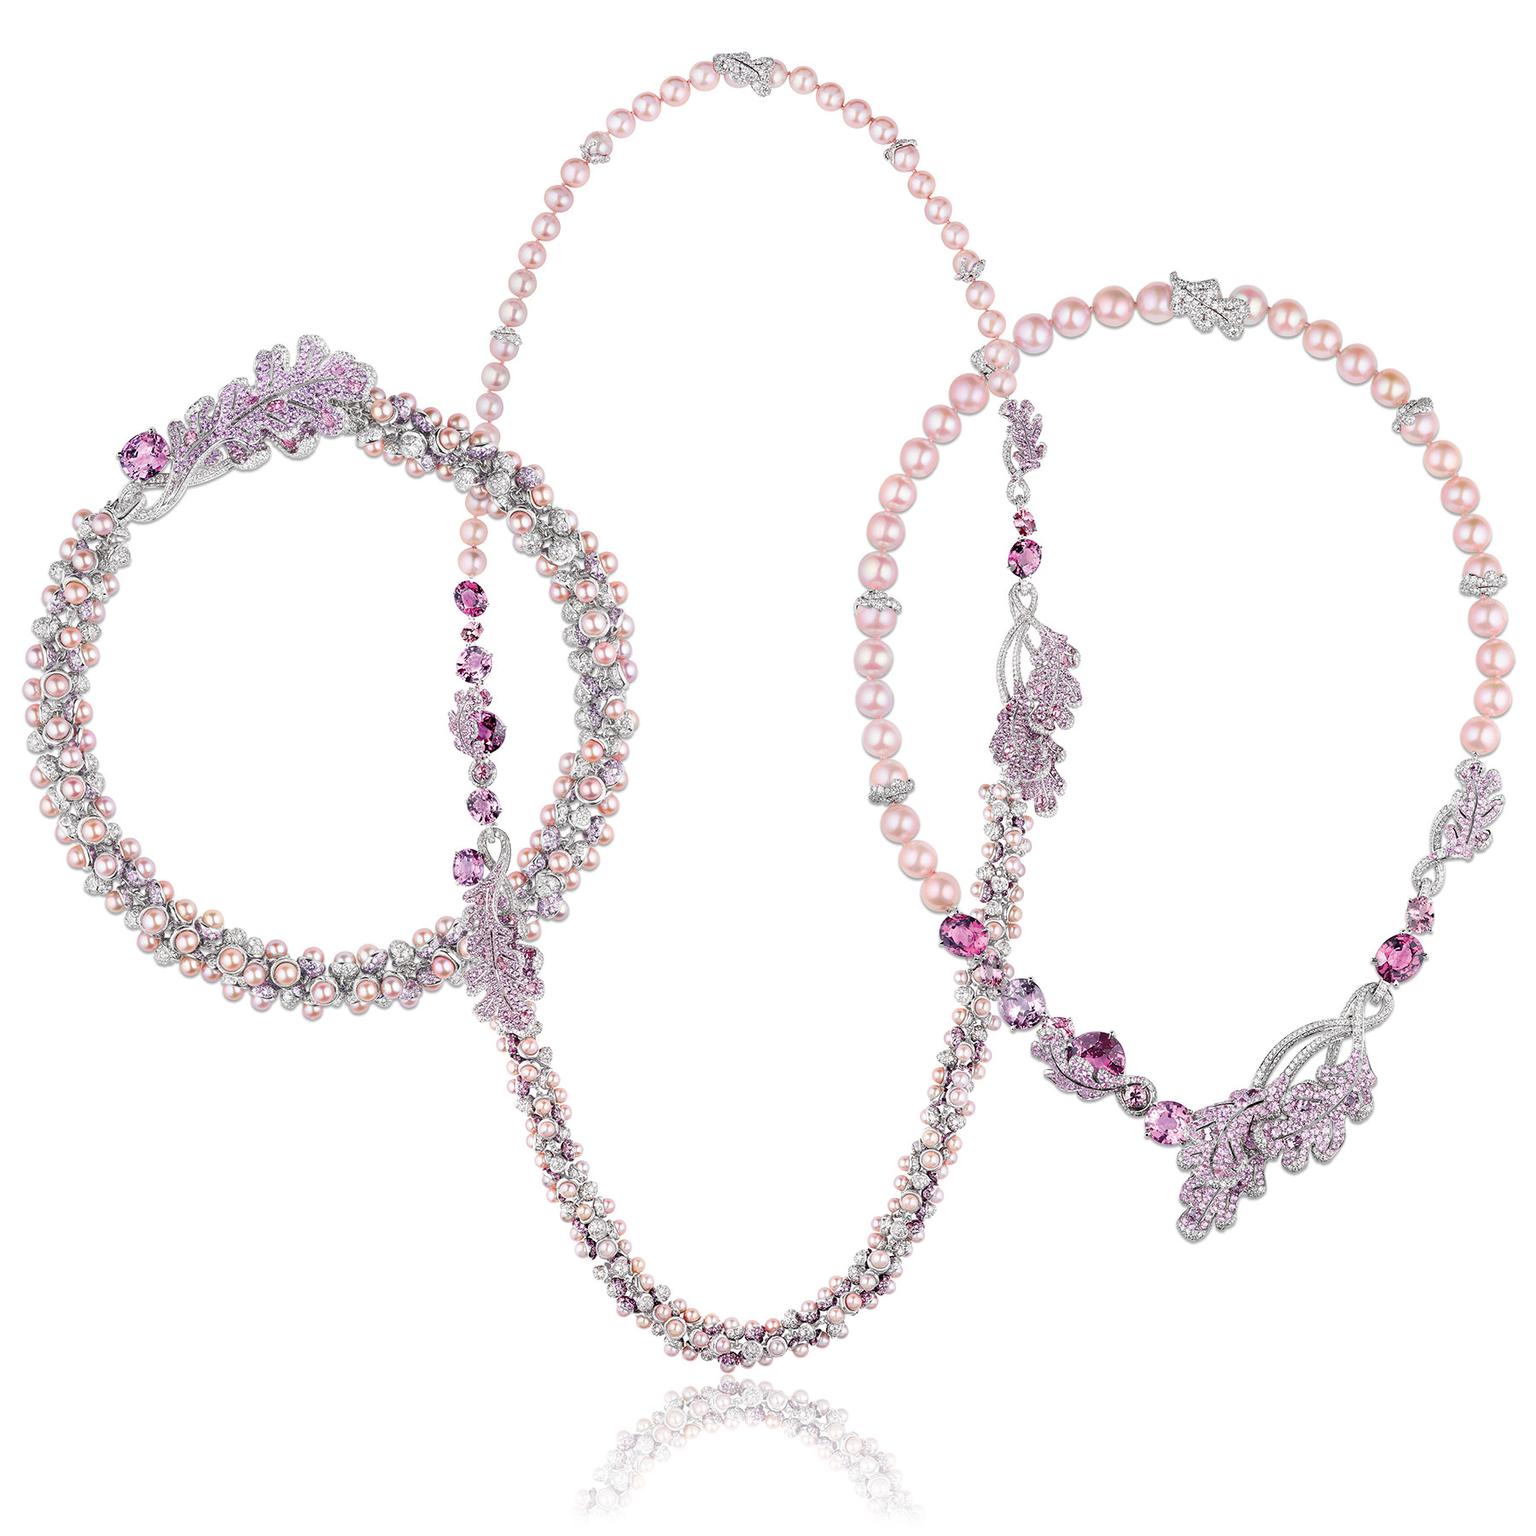 Racines Celeste transformable necklace with spinels, pearls, pink sapphires  and diamonds, Chaumet